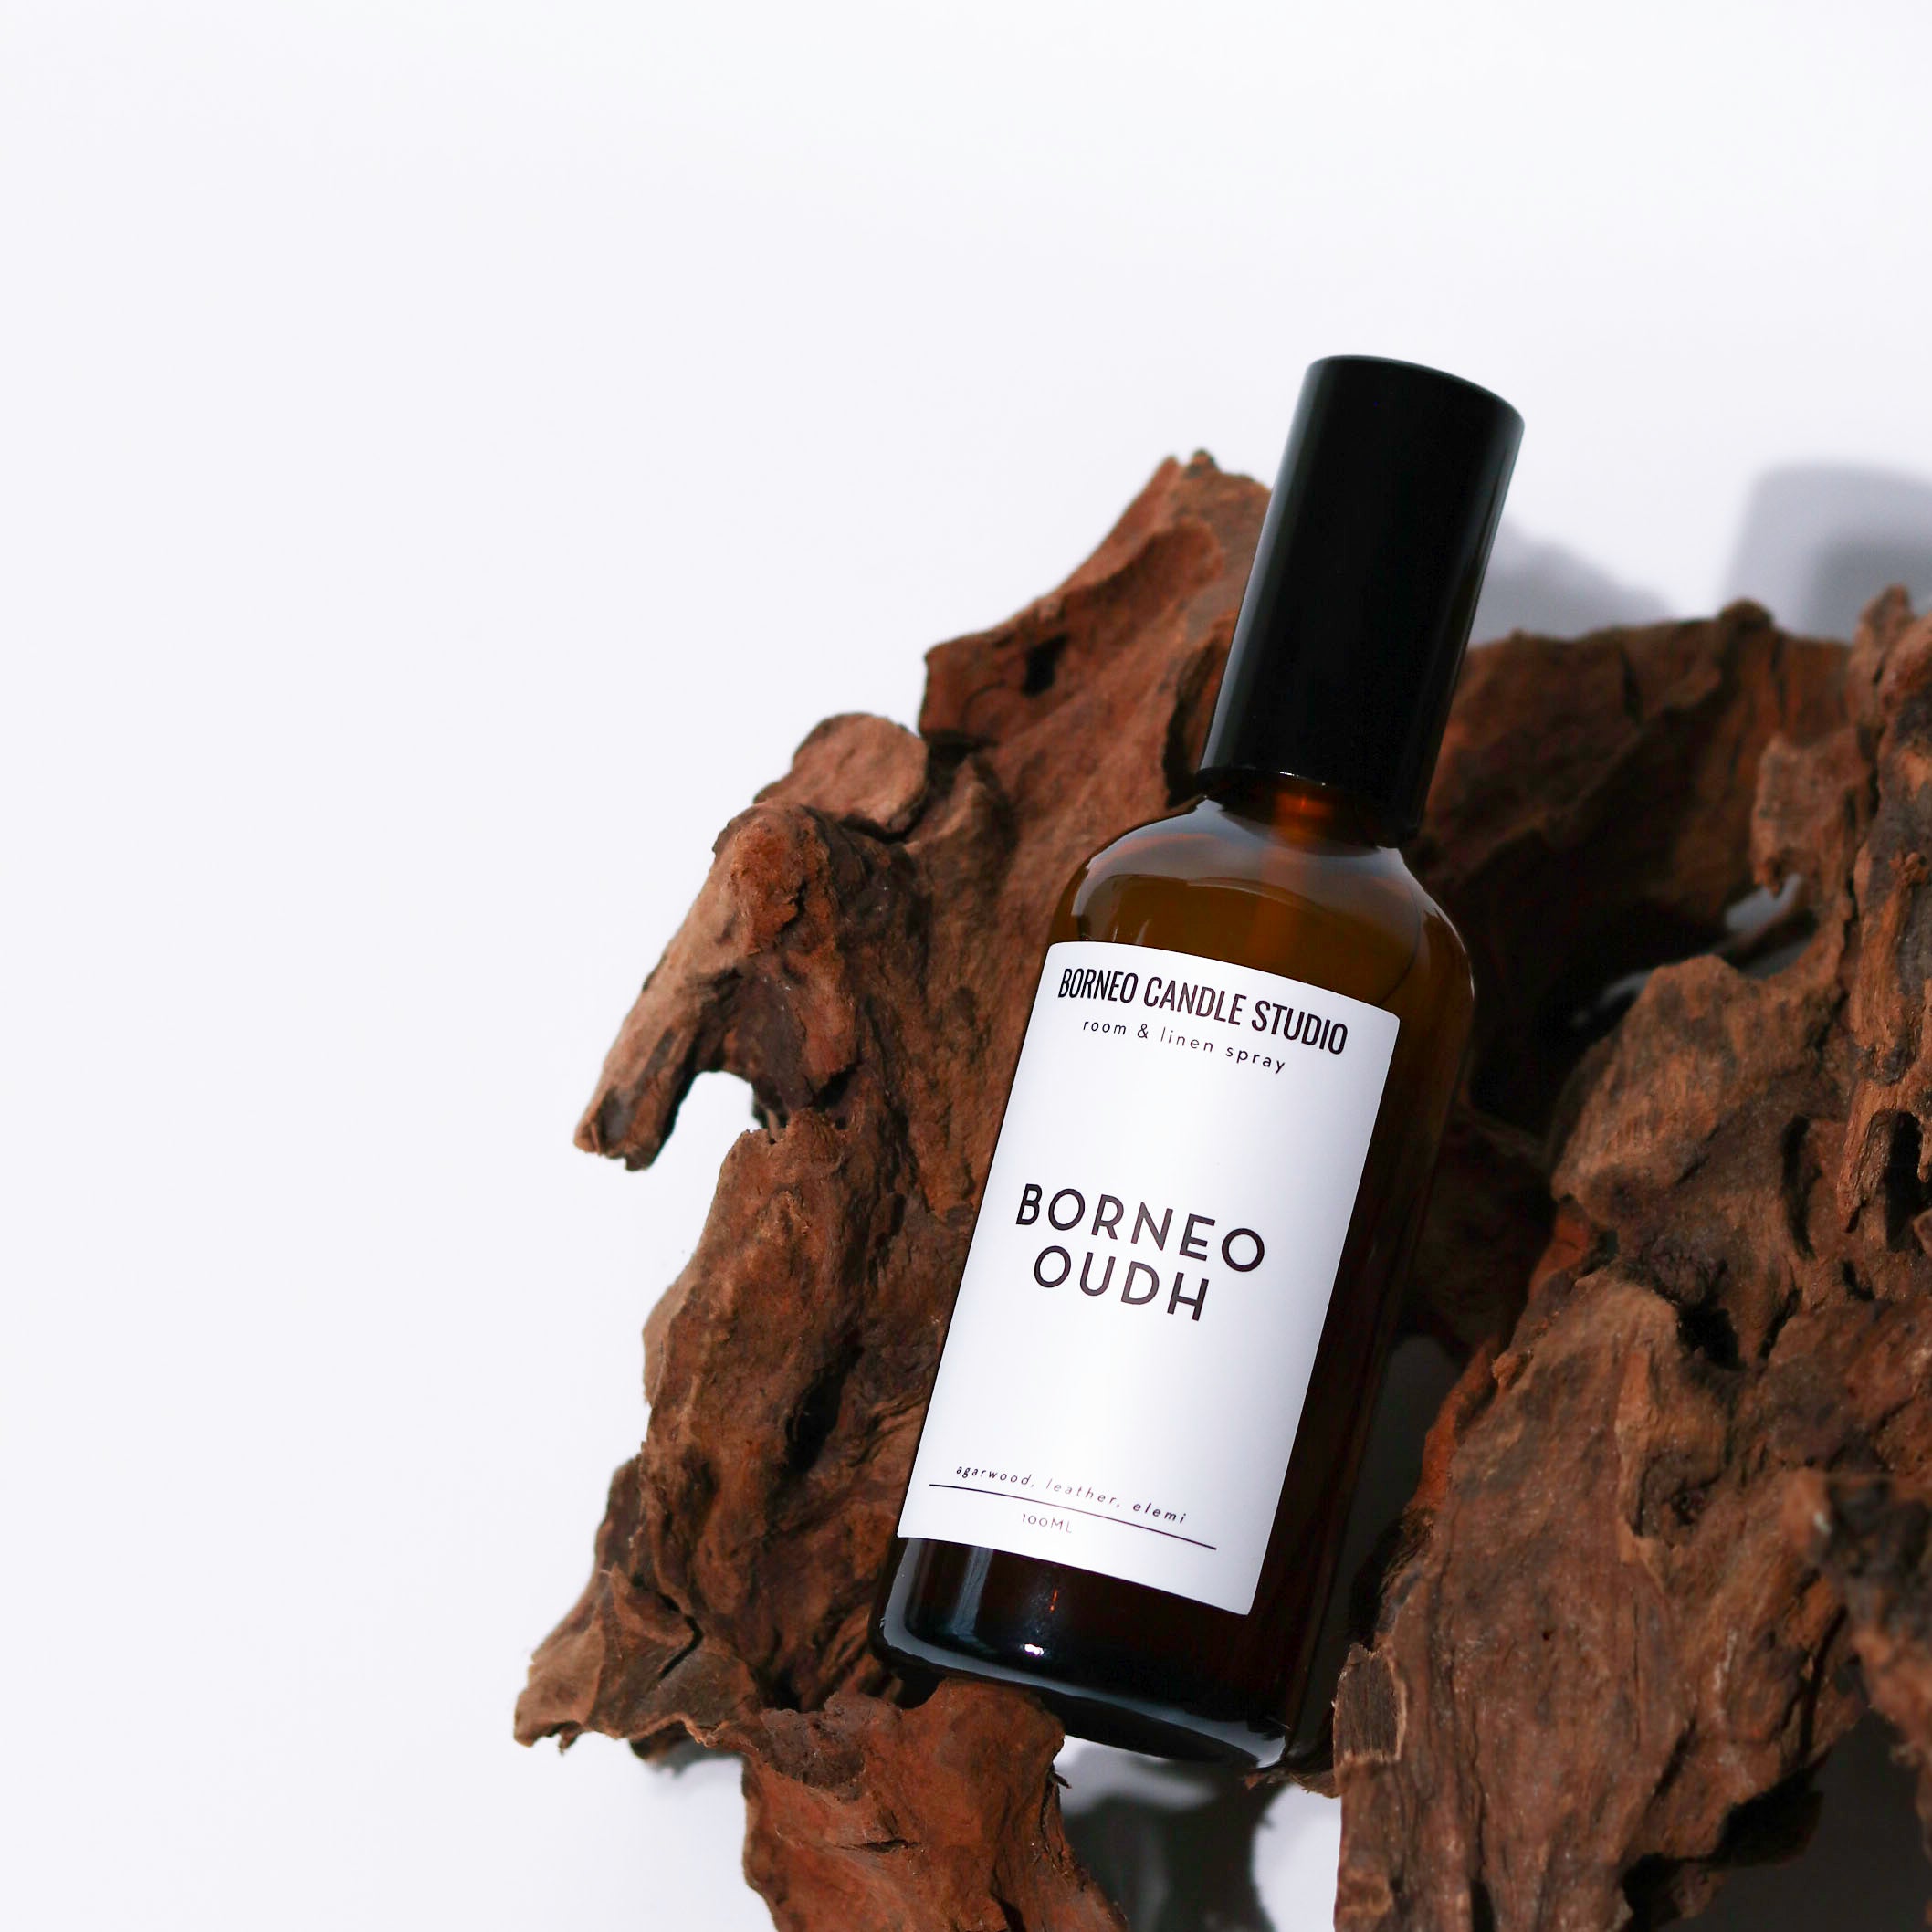 Borneo Oud Room and Linen Spray. Notes of agarwood, leather and elemi